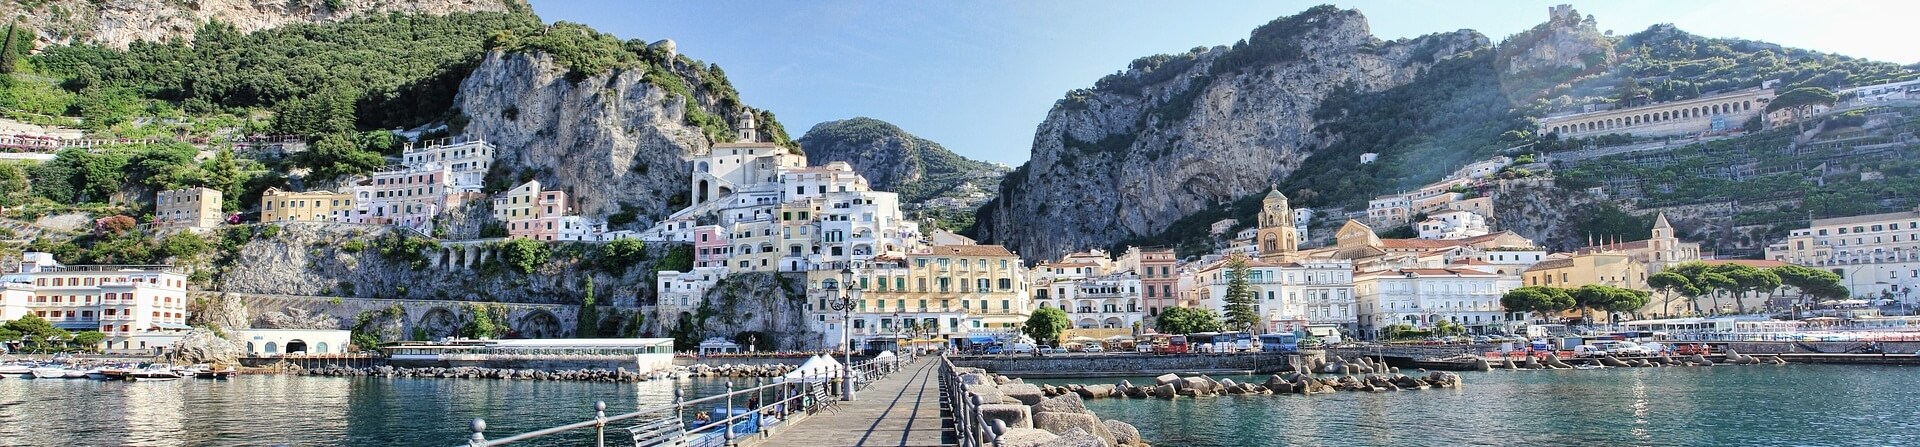 What is the best month to go to the Amalfi Coast?